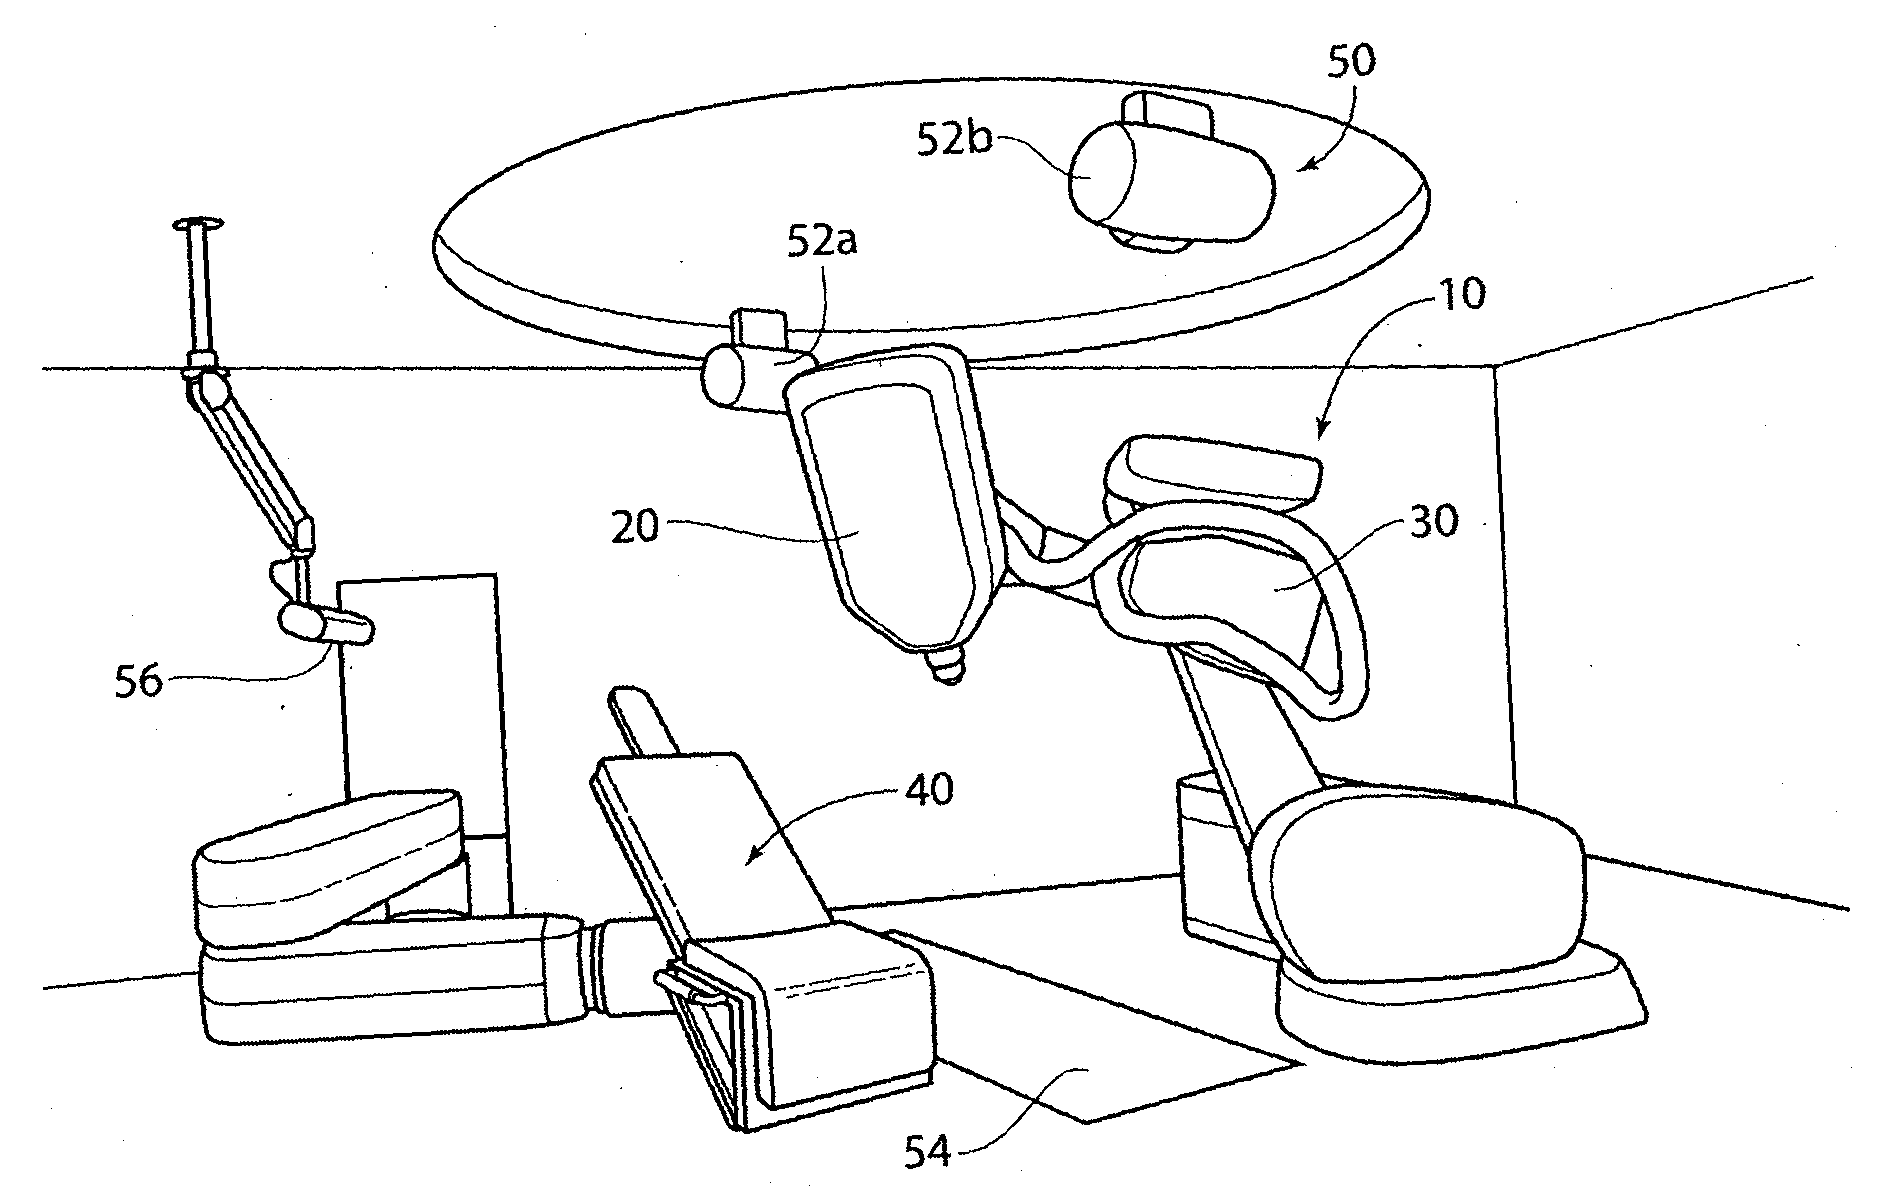 Methods and apparatus for renal neuromodulation via stereotactic radiotherapy